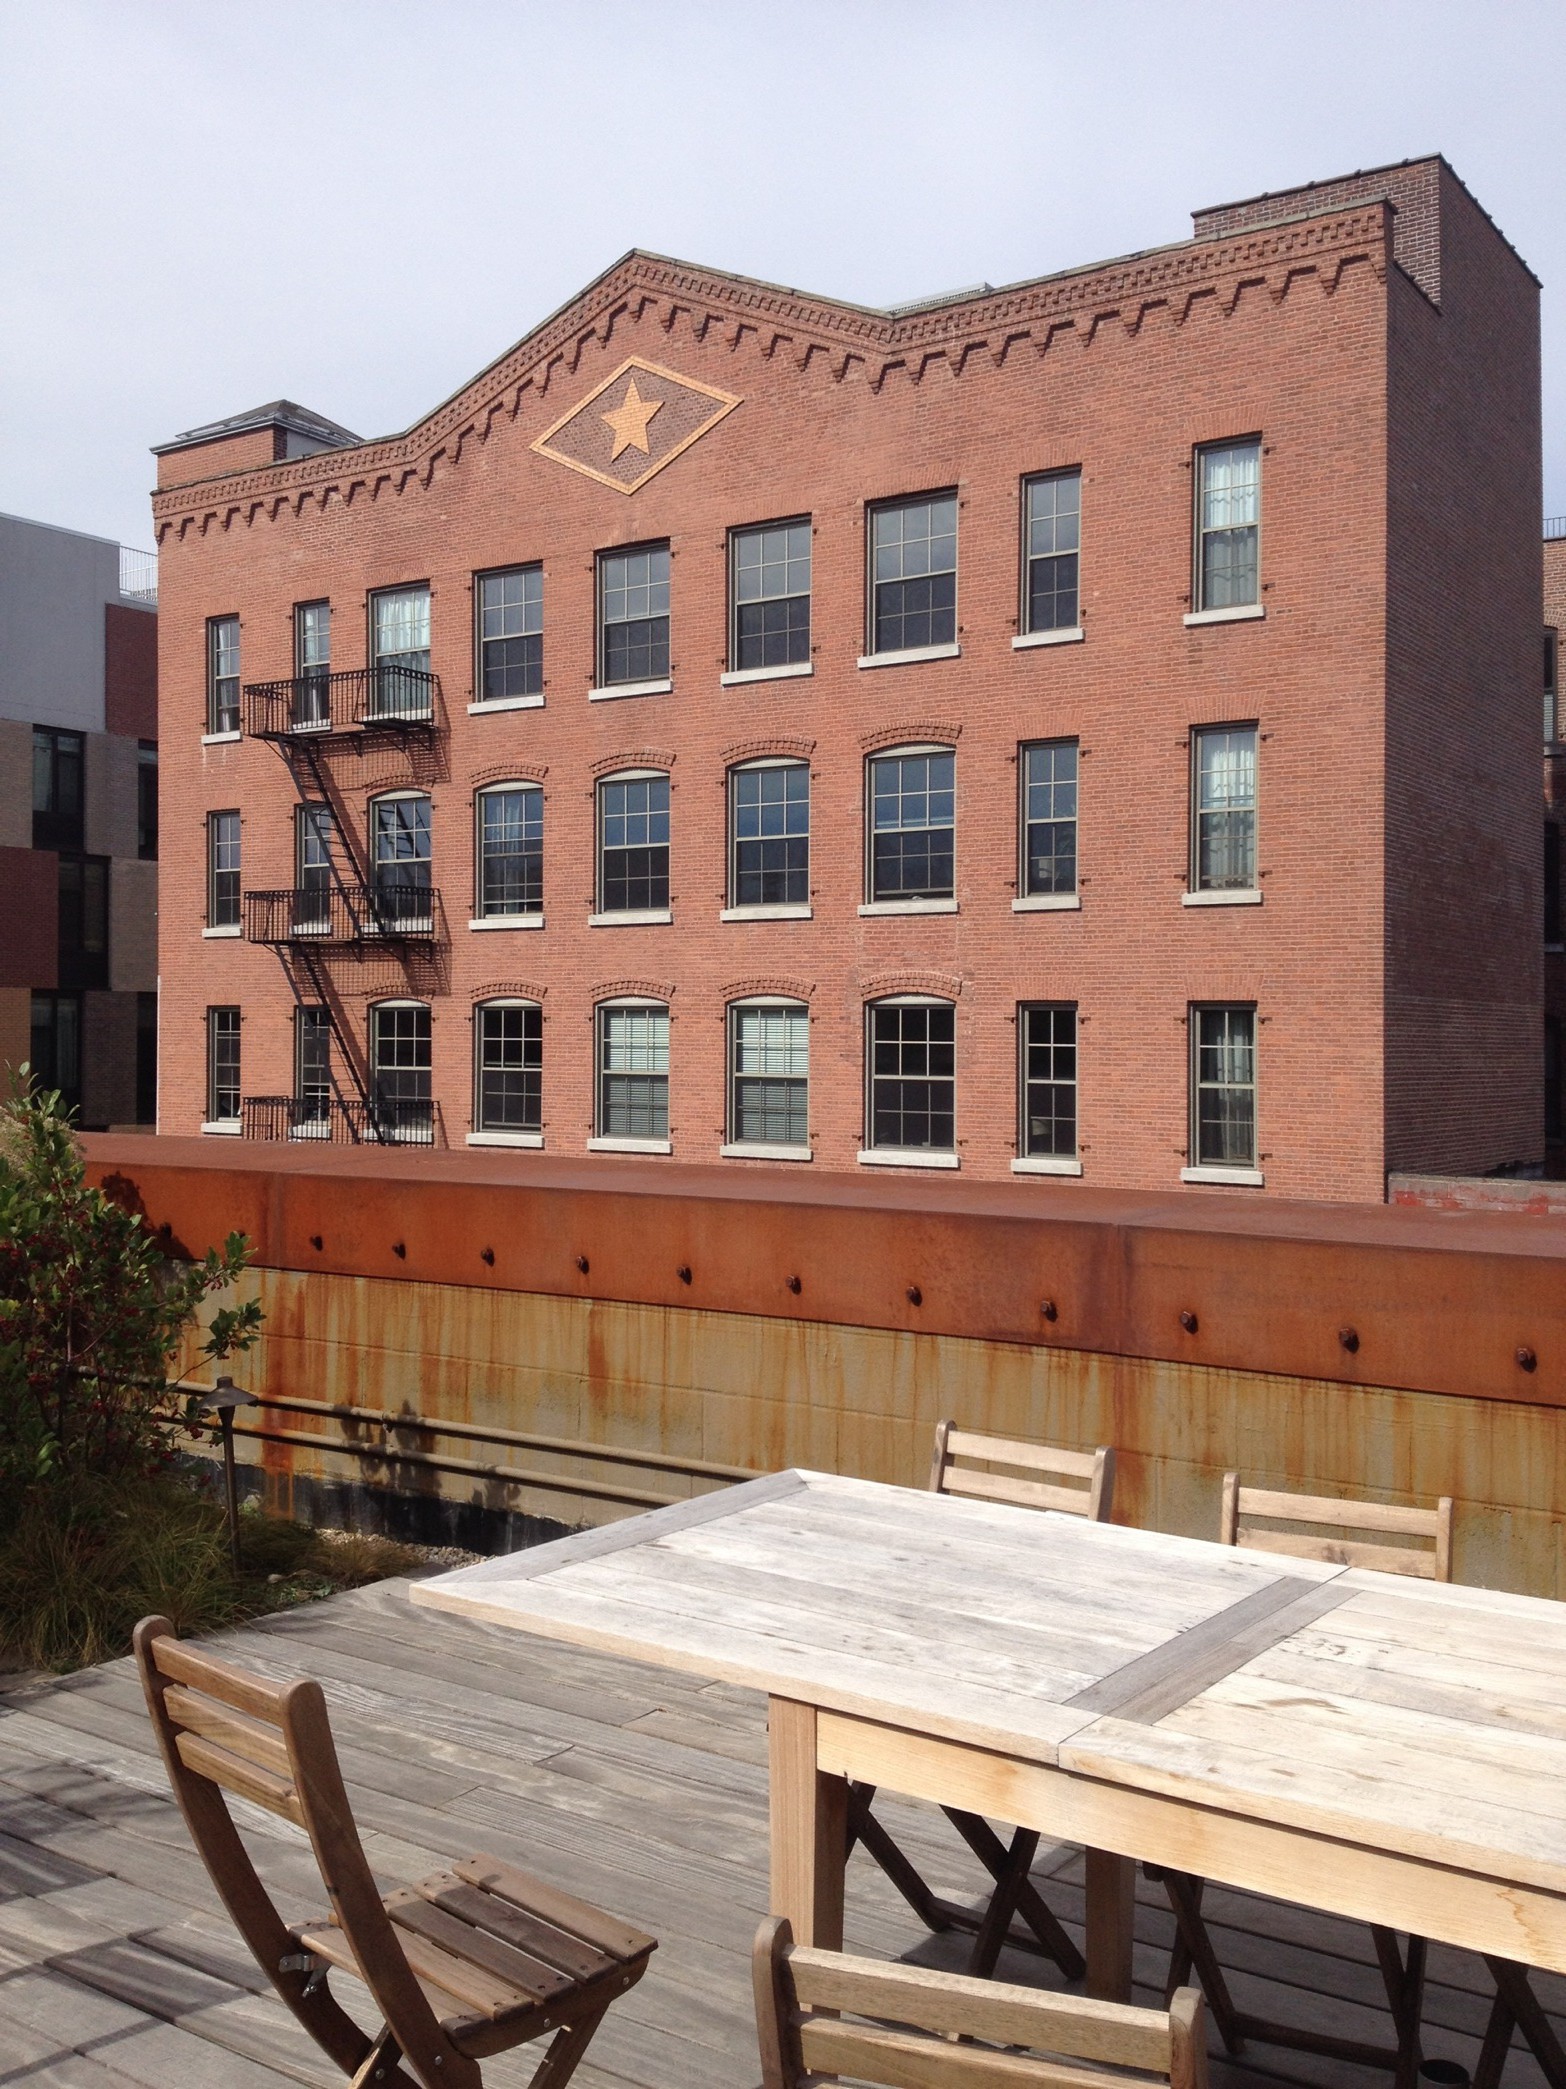 The rough corten steel beam encircles the rooftop terrace. Across the street, we can see a more traditionnal conversion of a brick building.